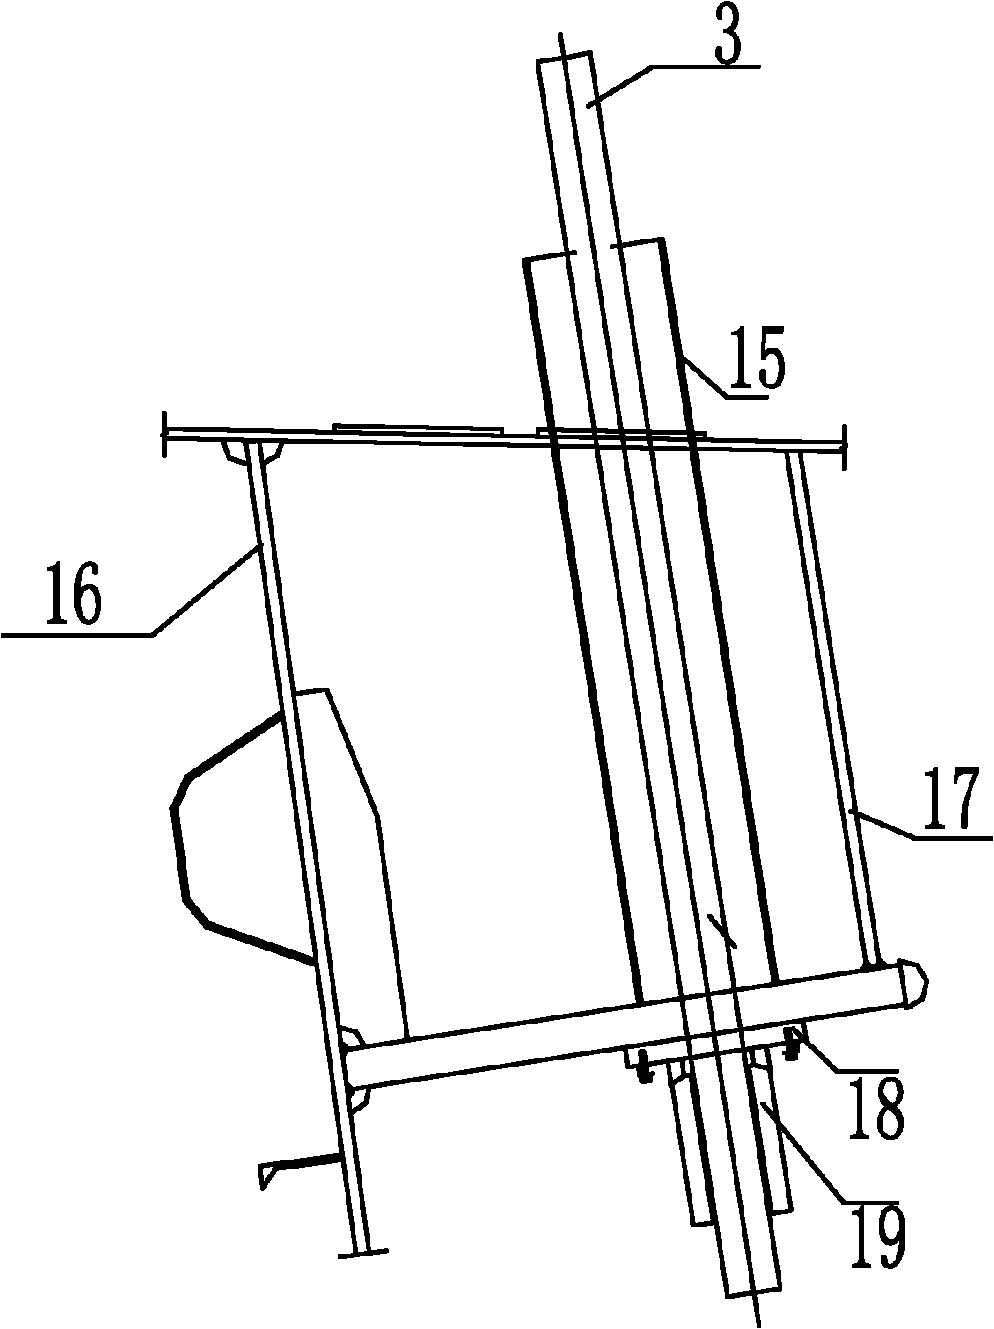 Method for stretching single-tower double-span self-anchored suspension bridge sling of side-span splay cable knot in supportless way